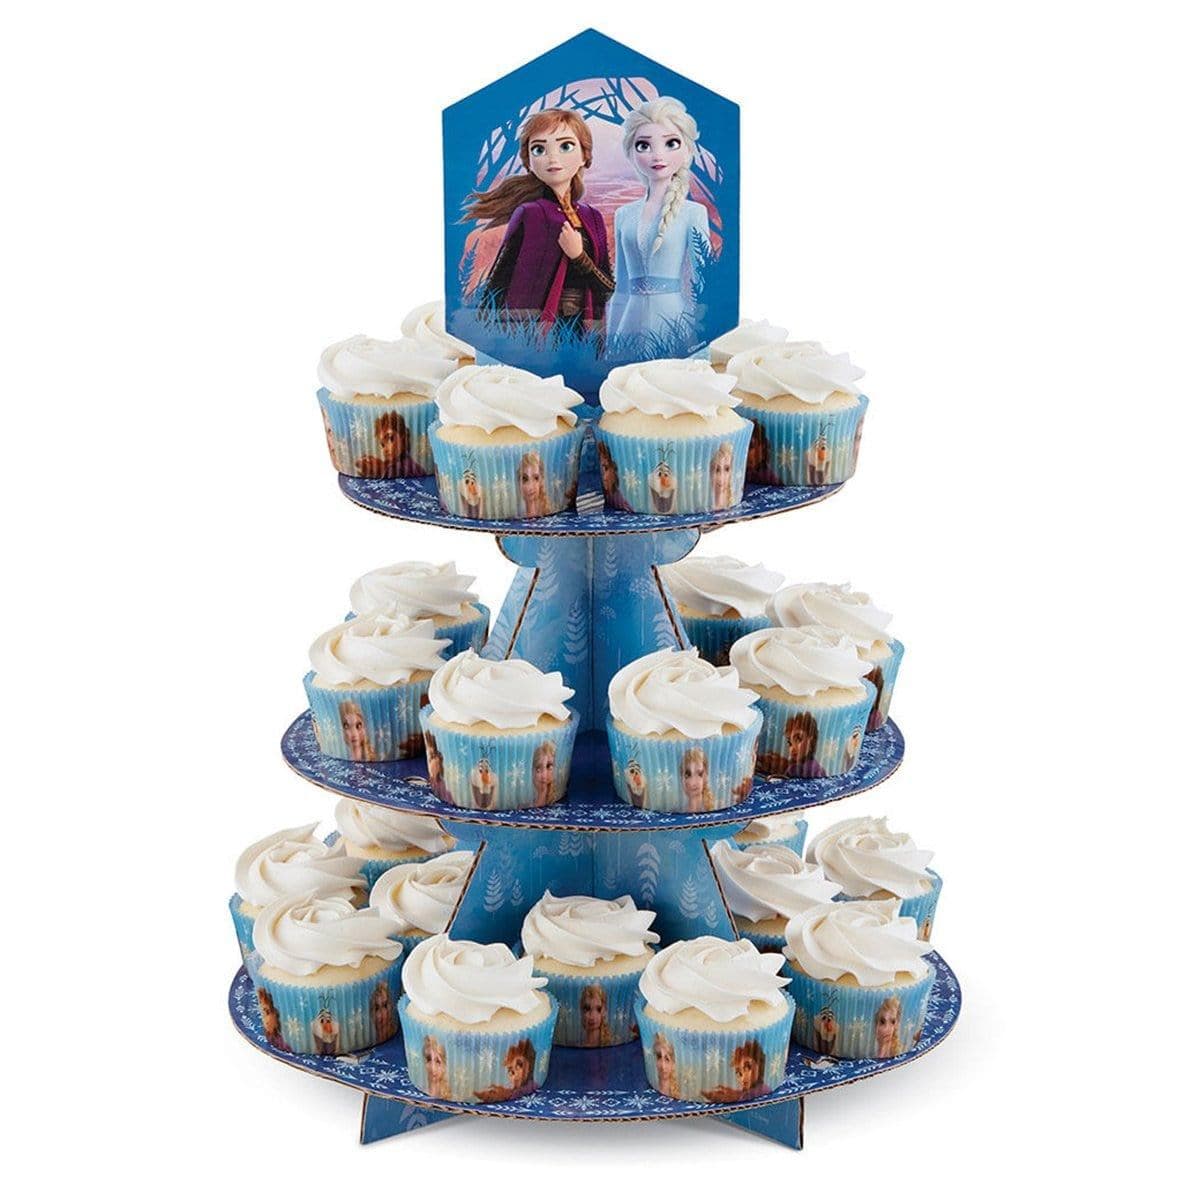 Buy Kids Birthday Frozen 2 cupcake stand sold at Party Expert